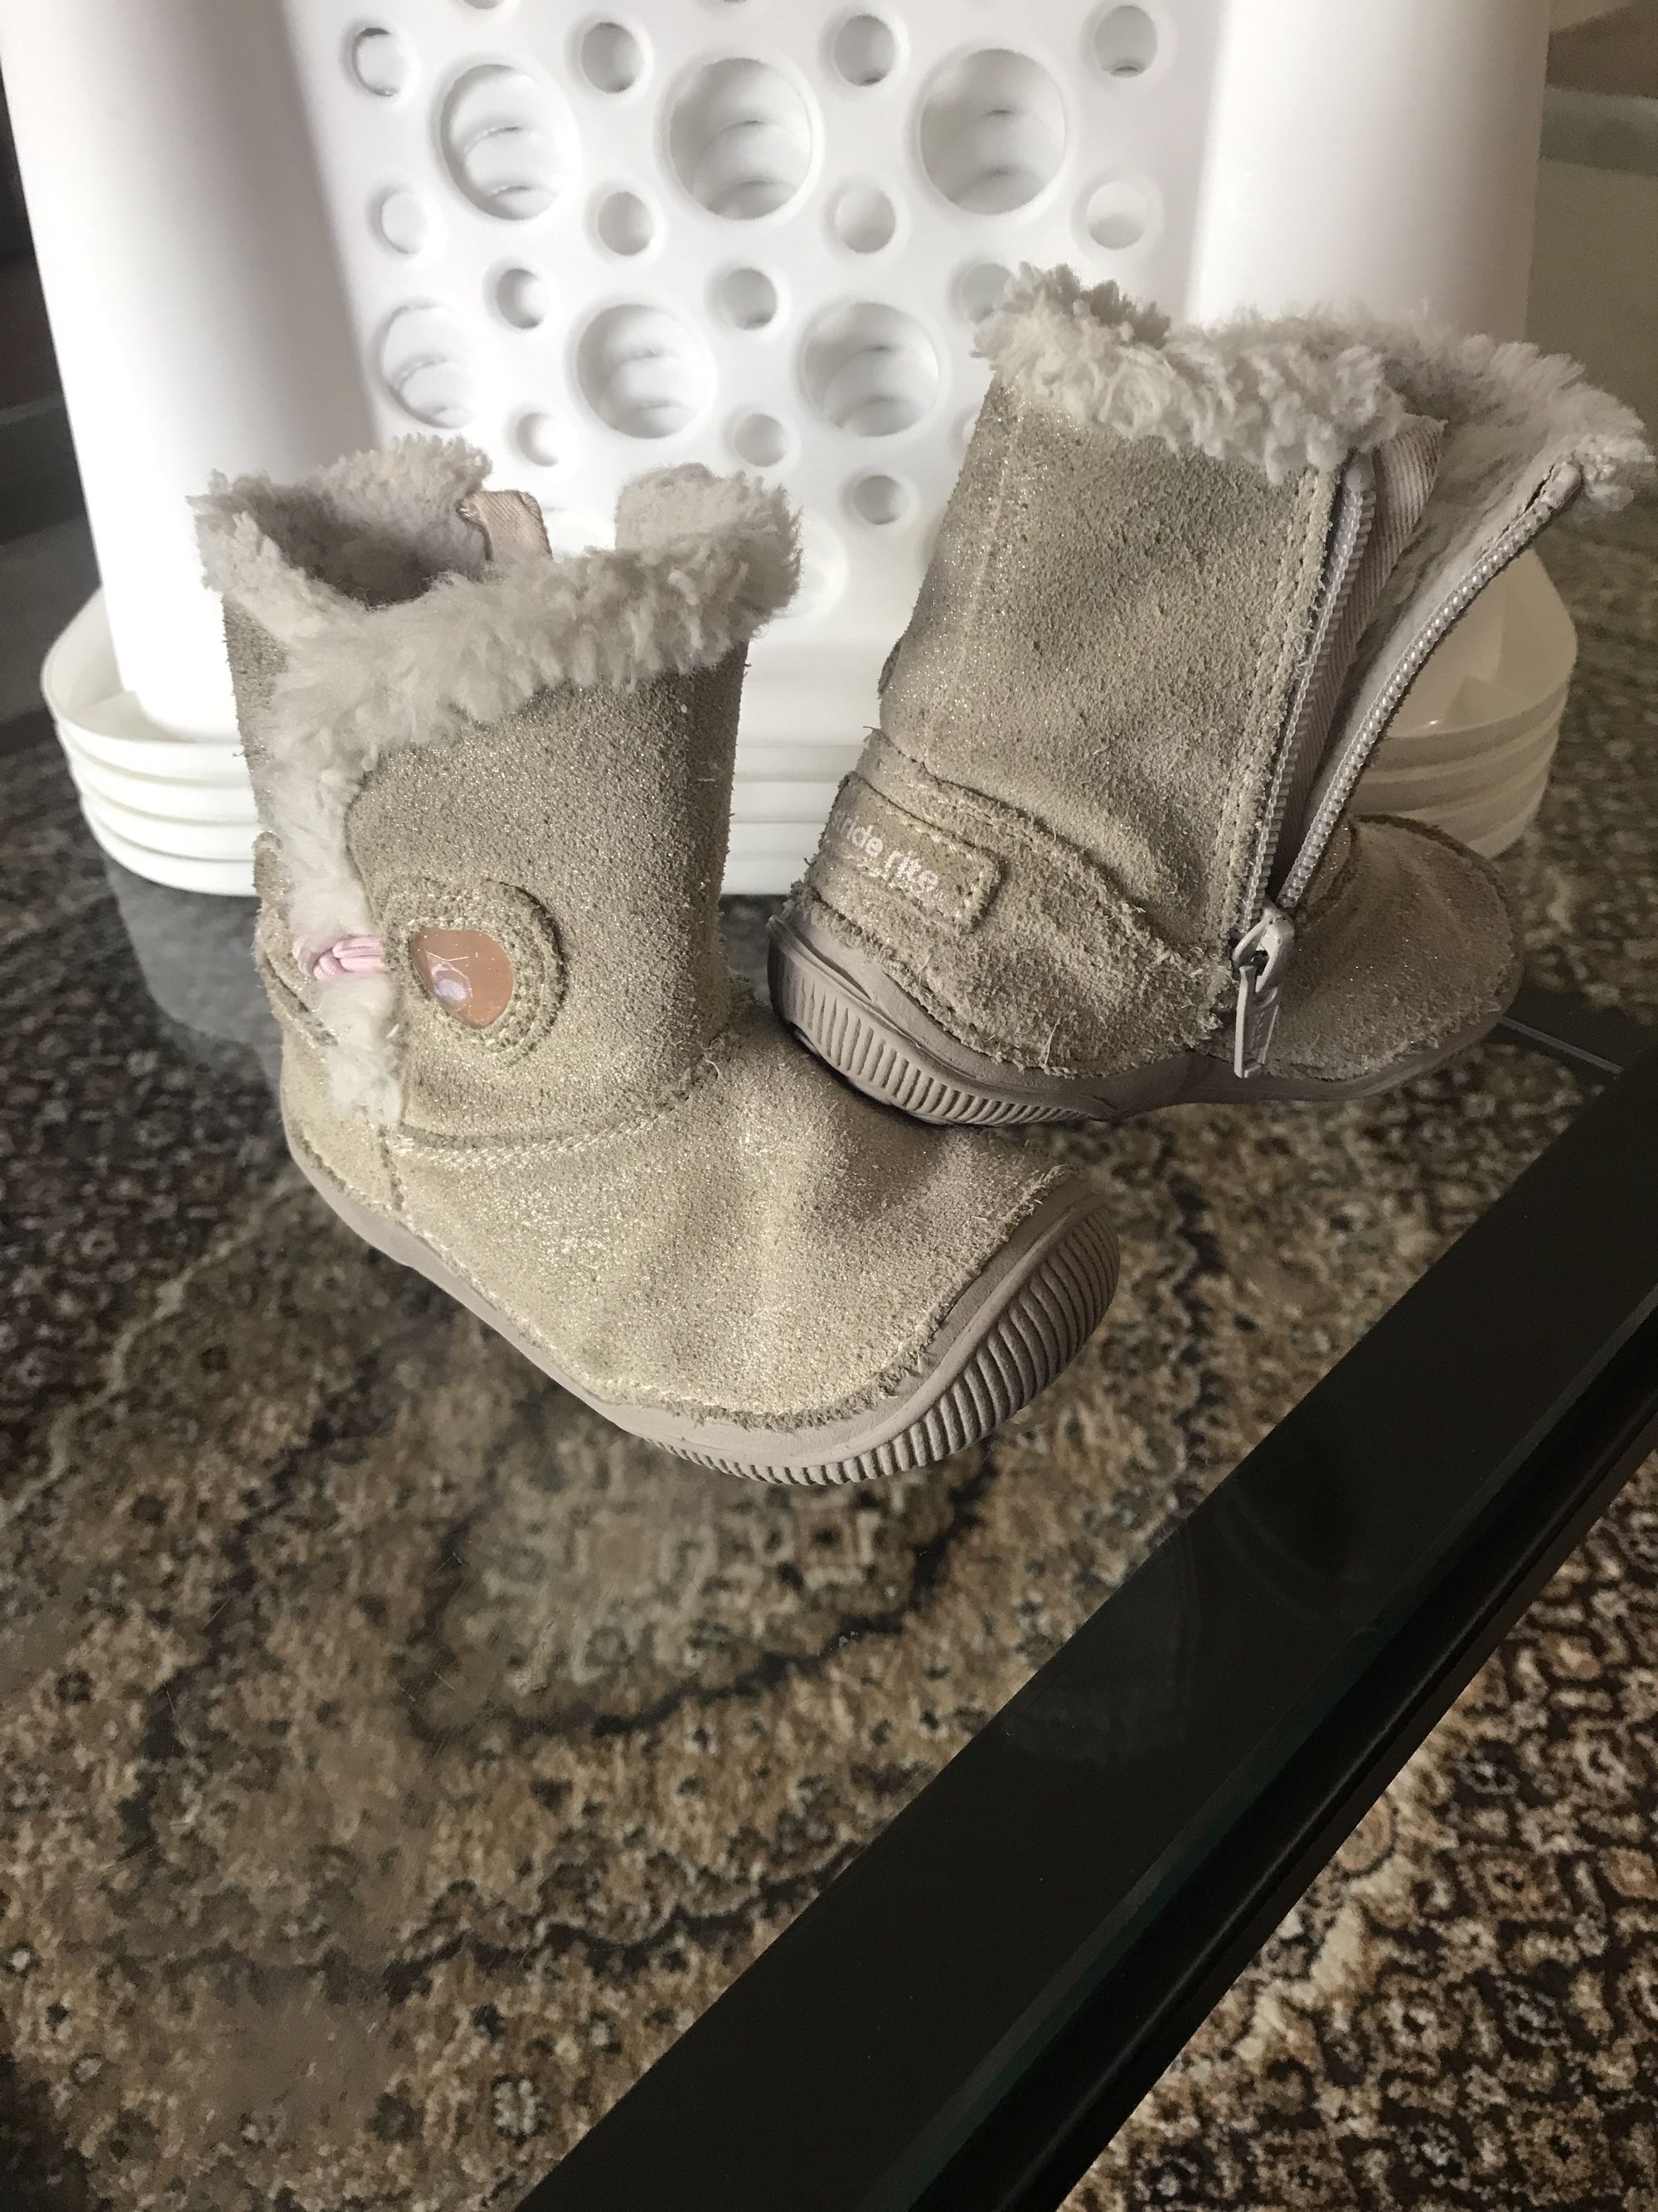 Cute Baby Girl Boots Size 5